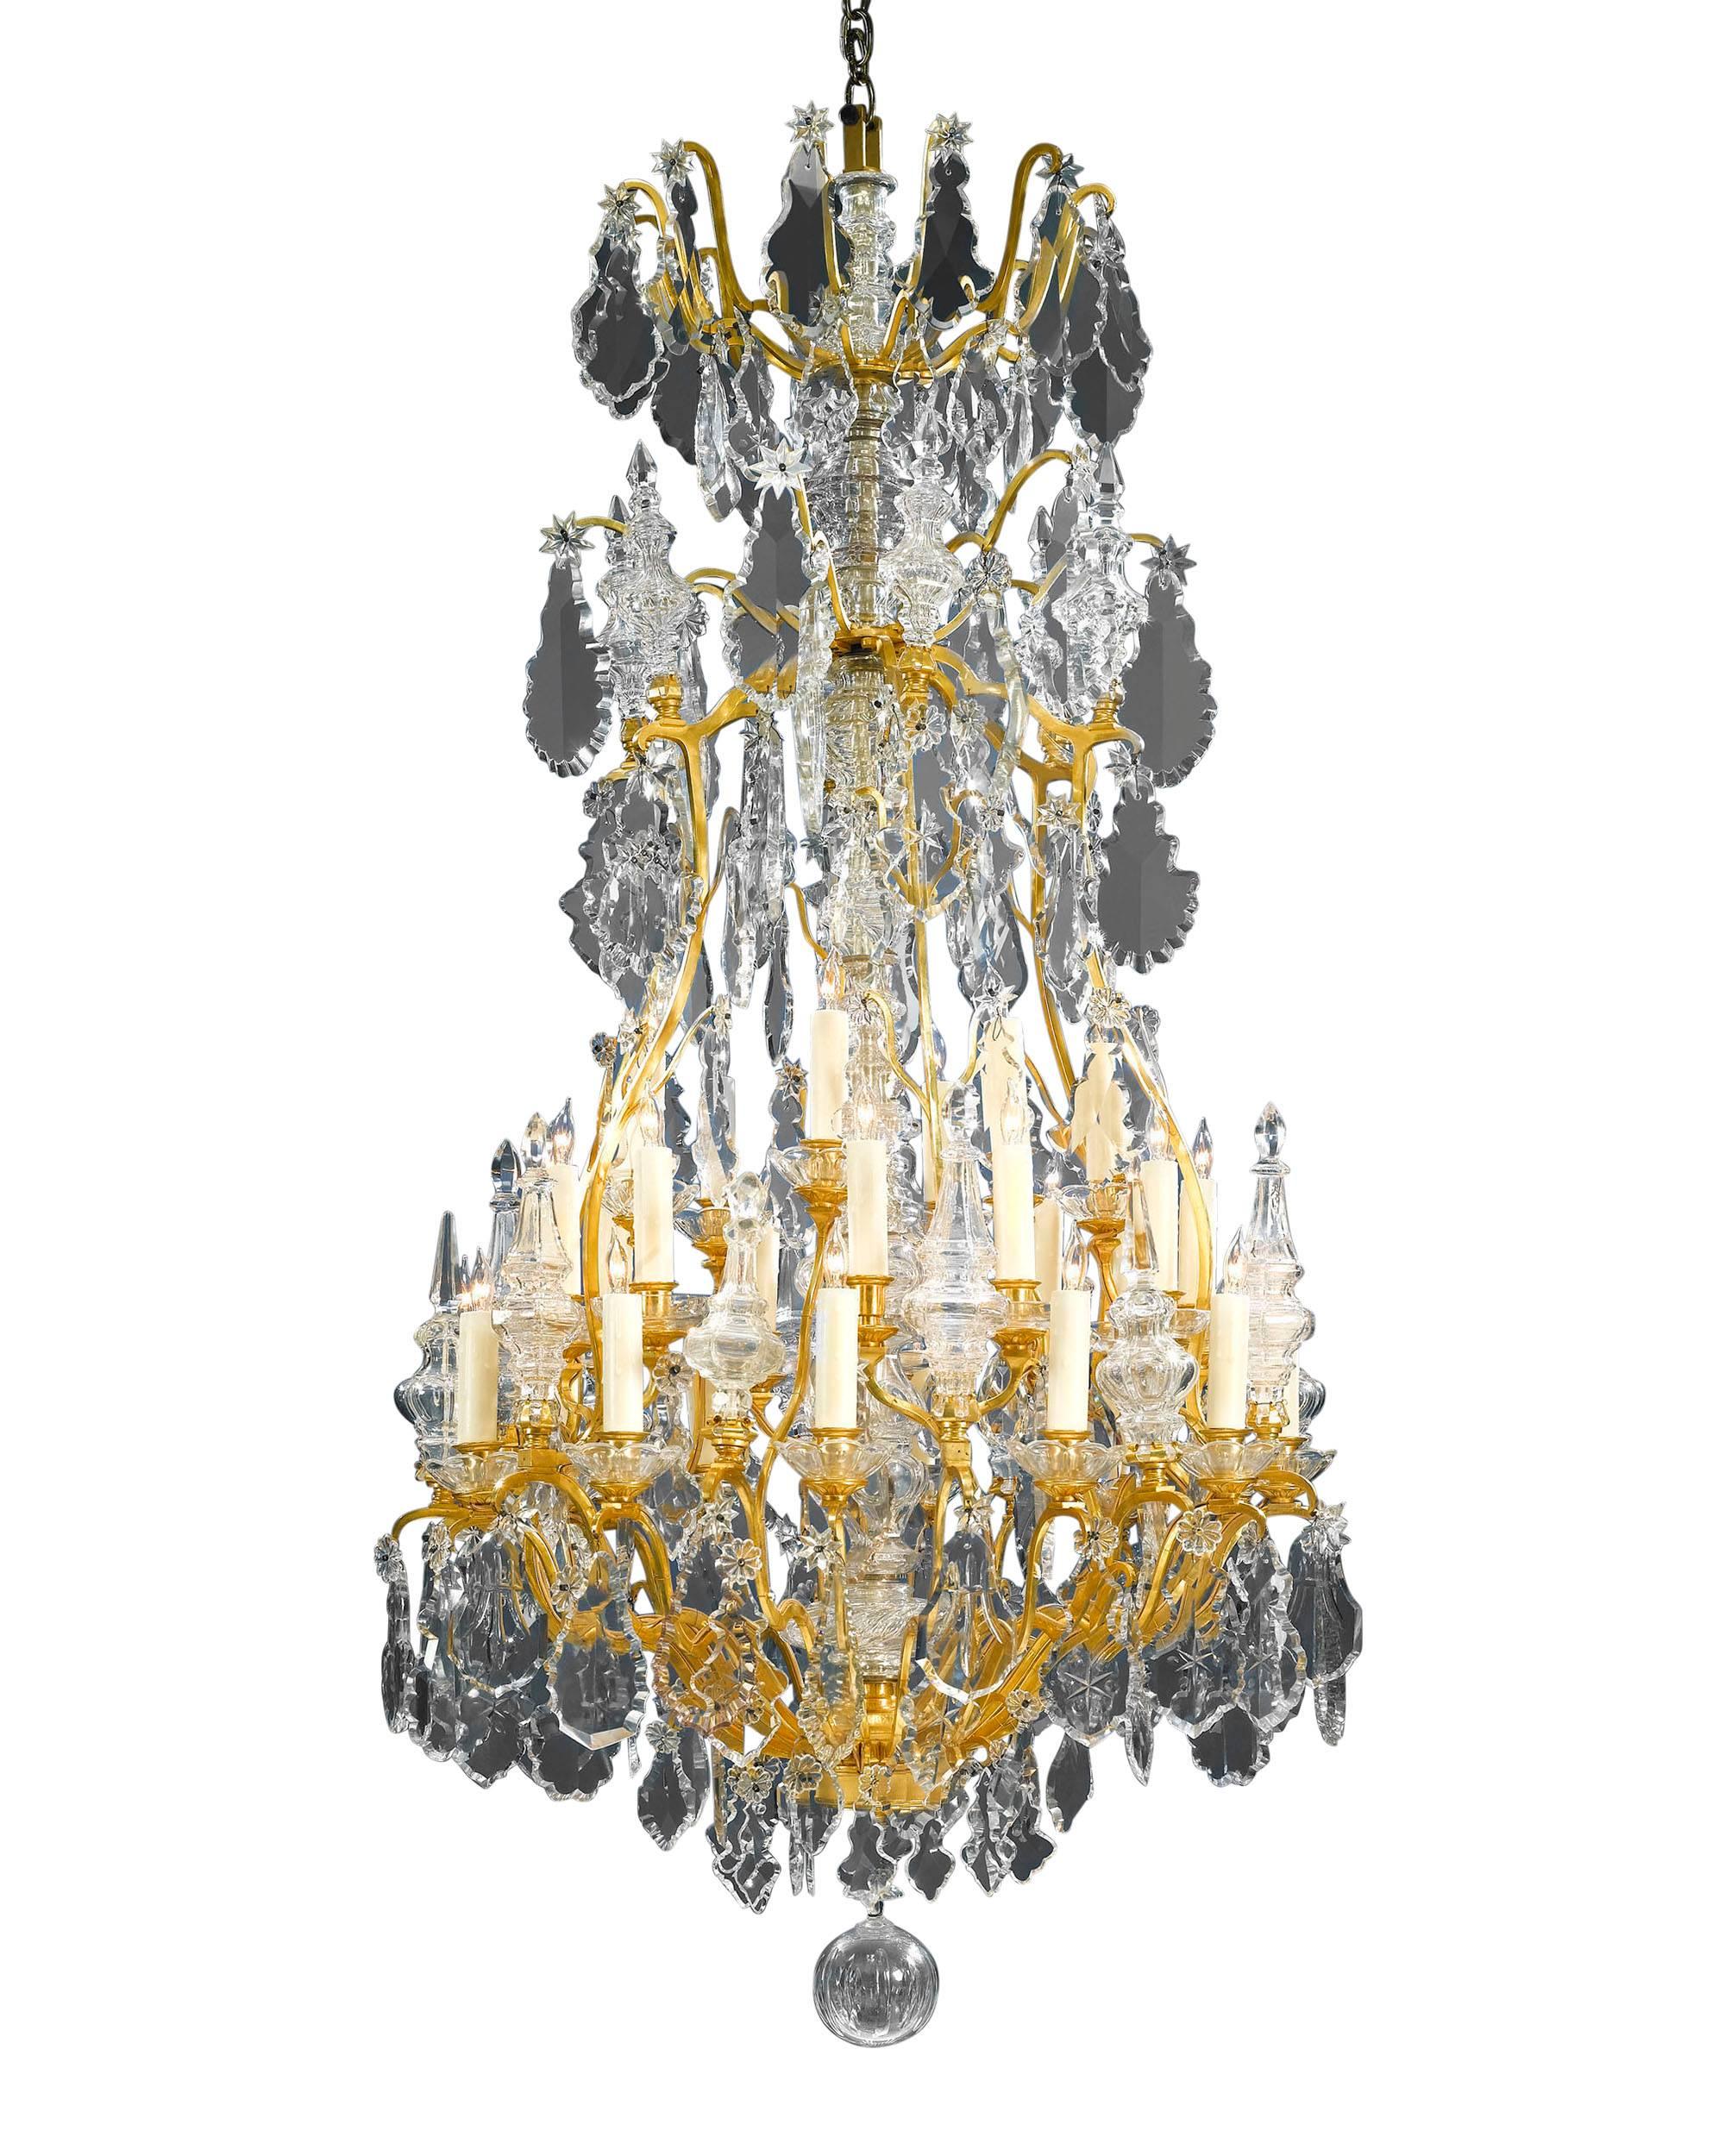 This Baccarat crystal and doré bronze chandelier is a grand sight to behold. Hundreds of beautifully designed oversized, luminous prisms and beads of hand wood-polished Baccarat crystal hang from scrolling branches of doré bronze. This thirty-light